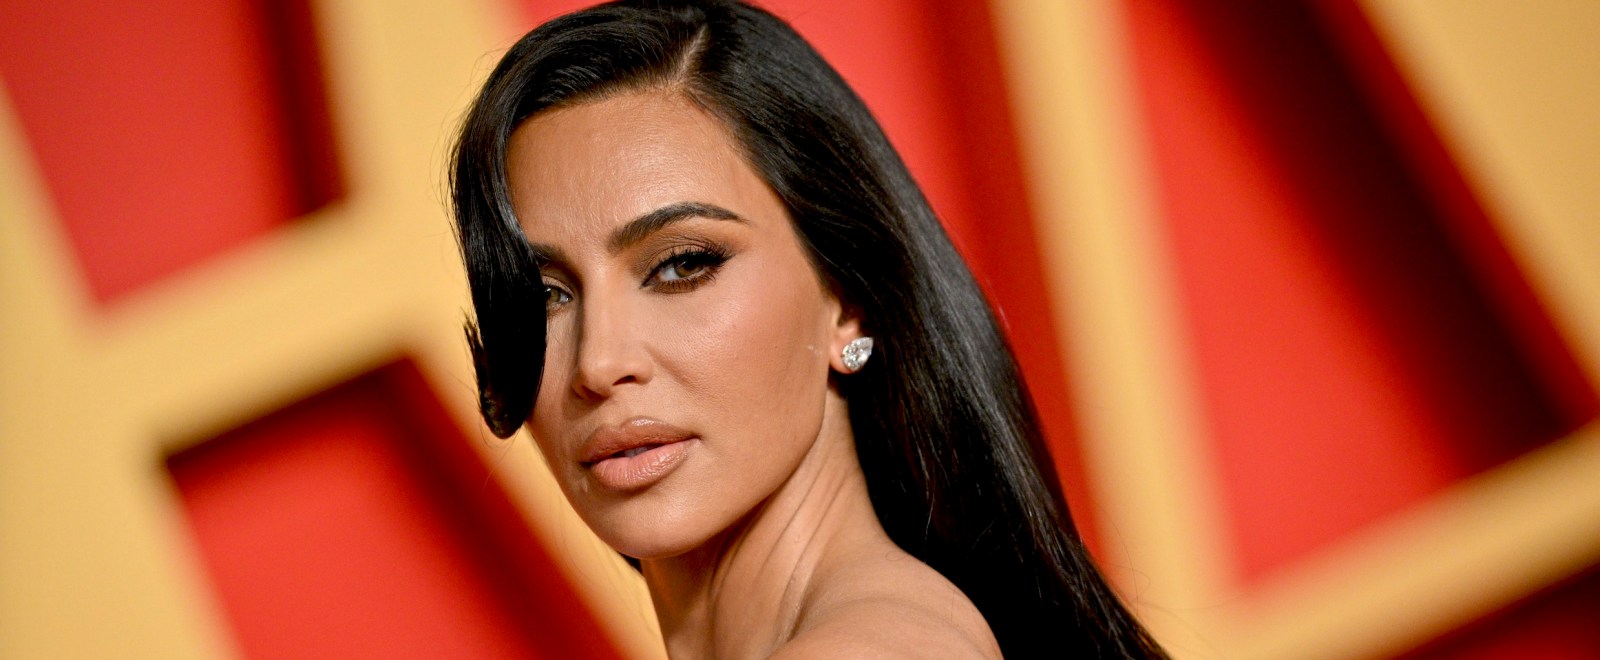 An ‘American Horror Story’ Star Explained What It Was Like Filming His First Sex Scene With None Other Than Kim Kardashian